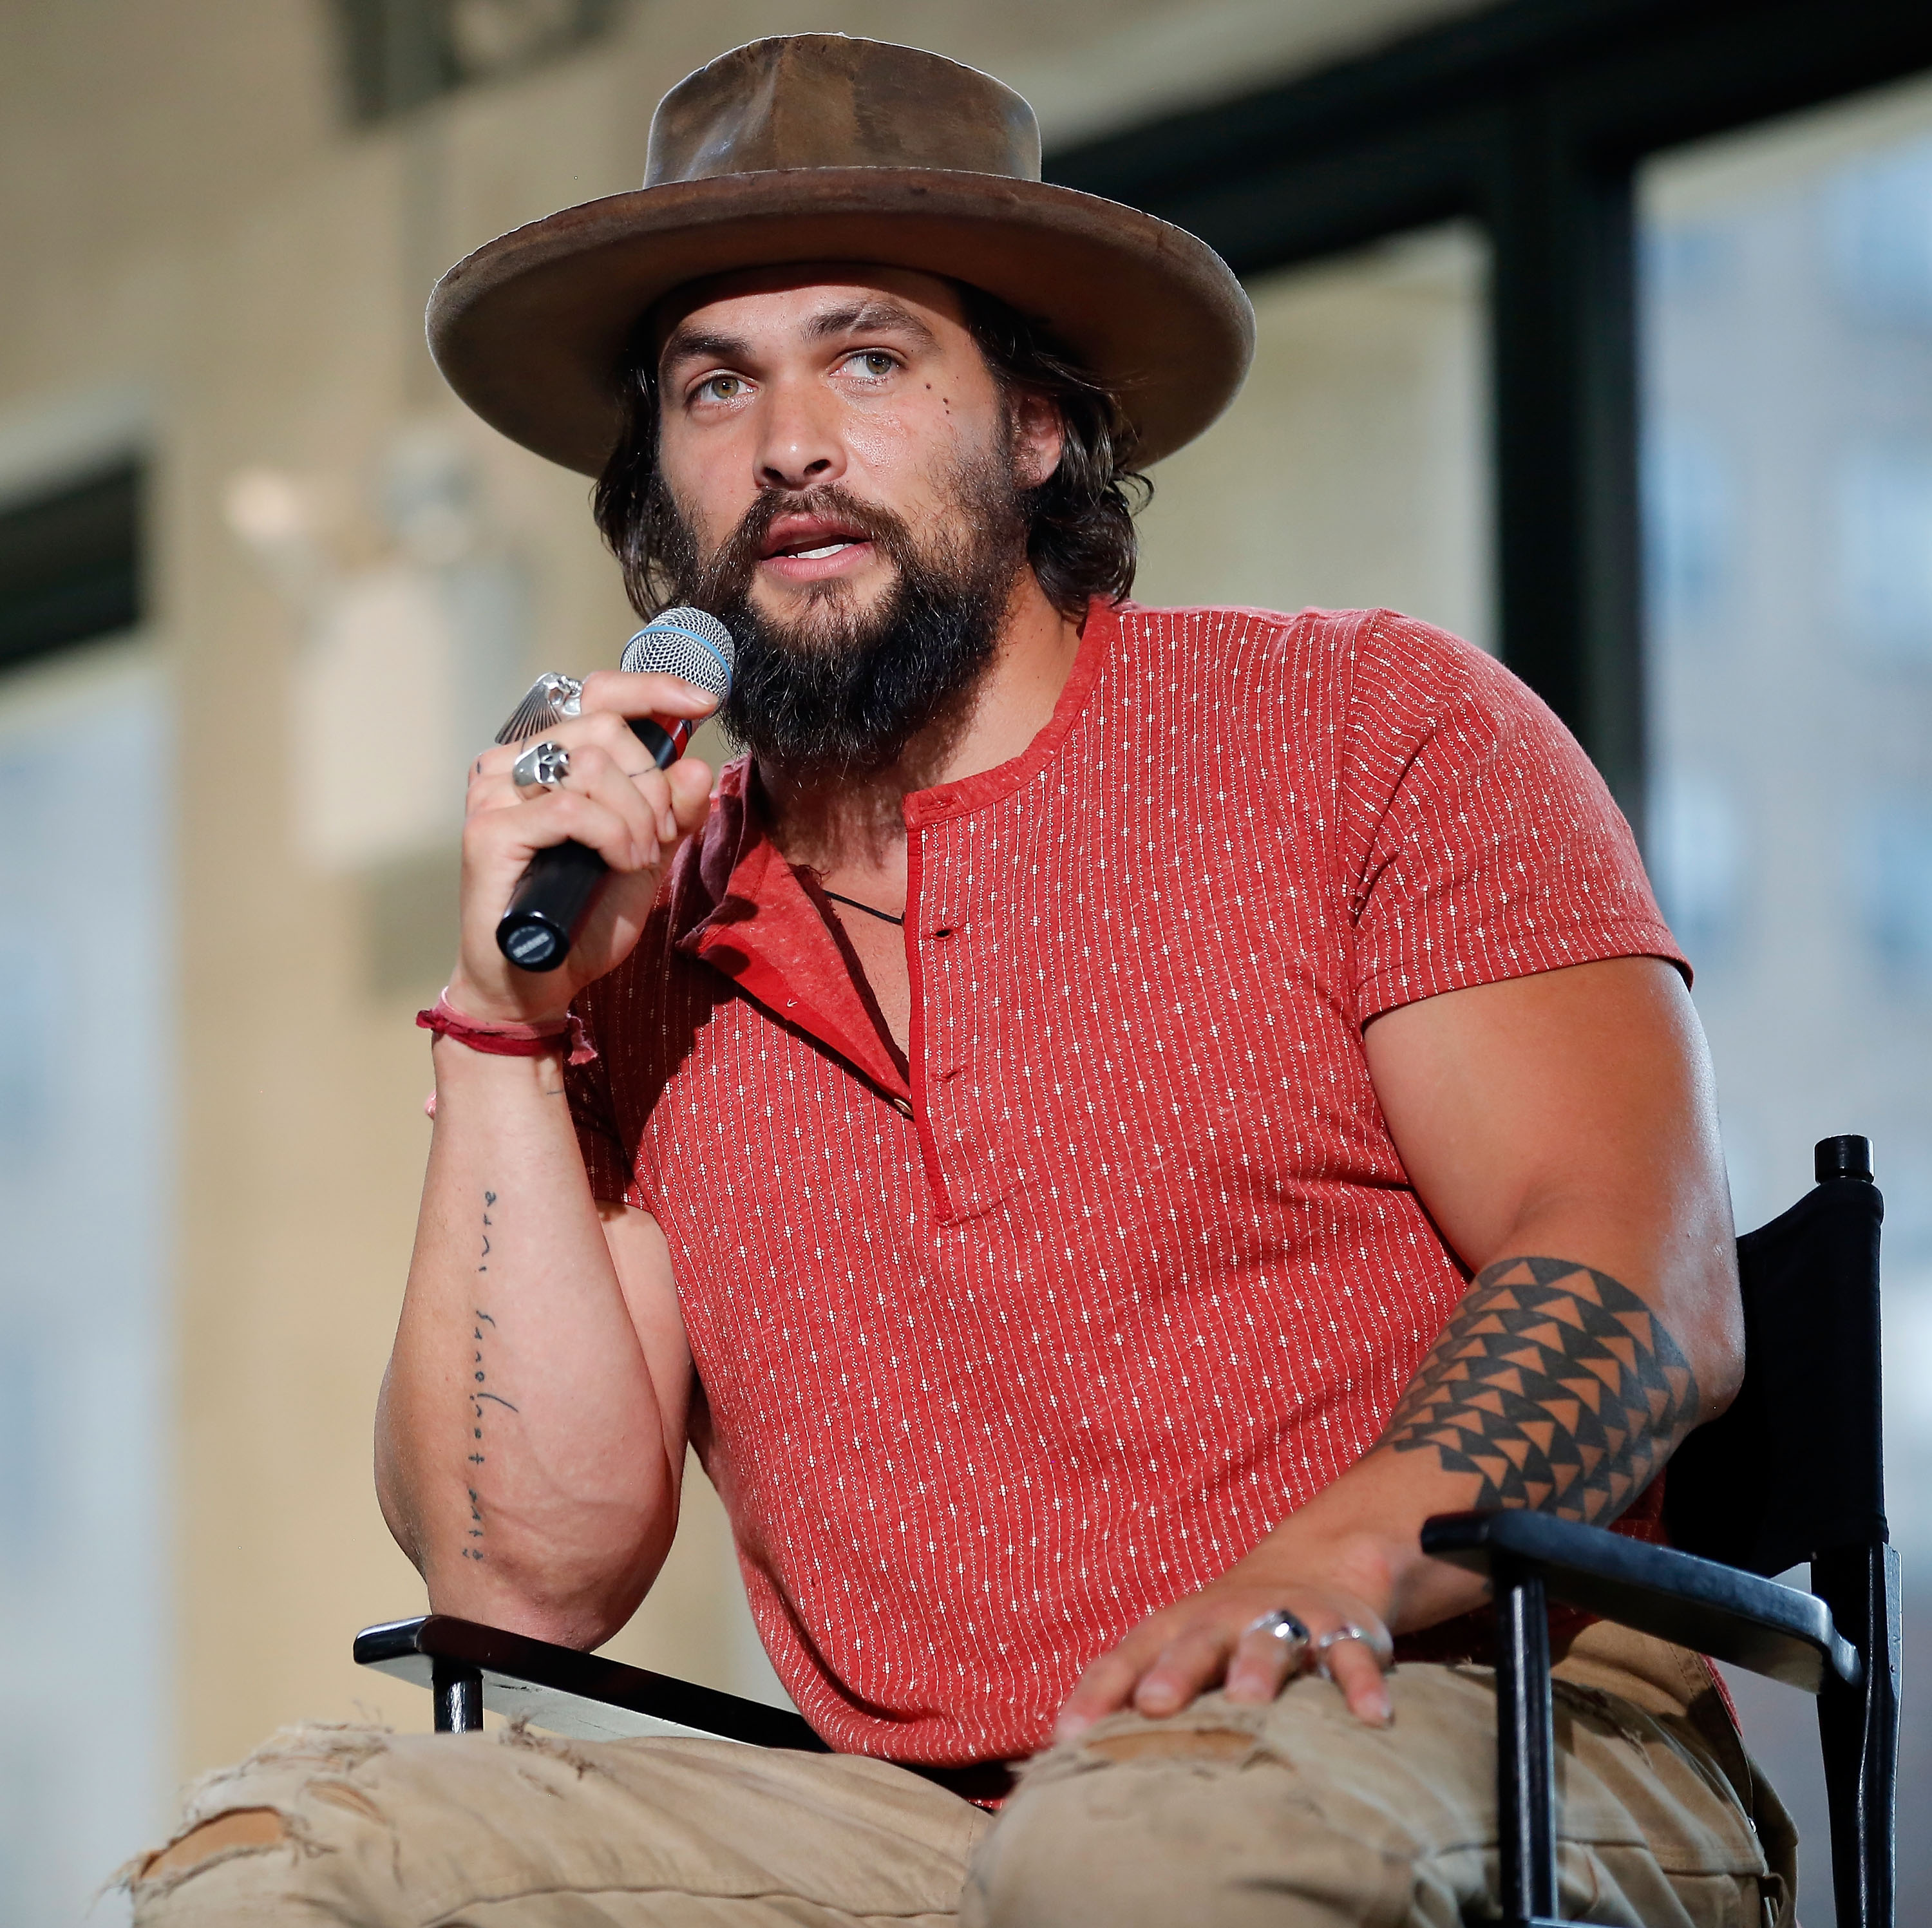 Jason Momoa speaks during the premier of "Road to Paloma" on July 8, 2014 in New York | Source: Getty Images